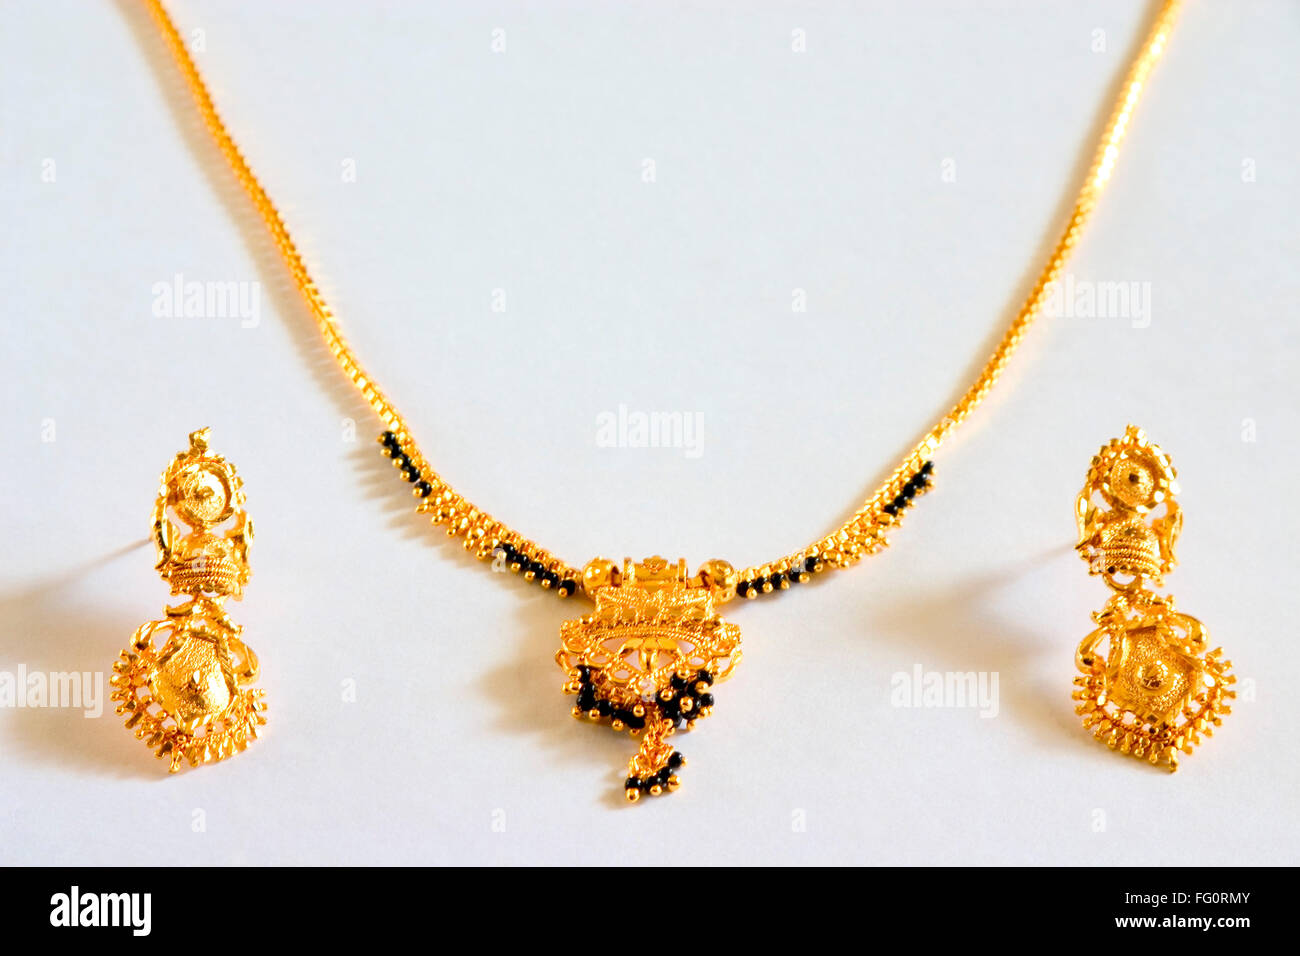 Buy Long Mangalsutra Designs Gold Plated Necklace maharashtrian/south indian  style vati Pendant mangalsutra red black beads gold multicolor chain Gold  Mangalsutra Latest Designs For Women (30 Inches) at Amazon.in